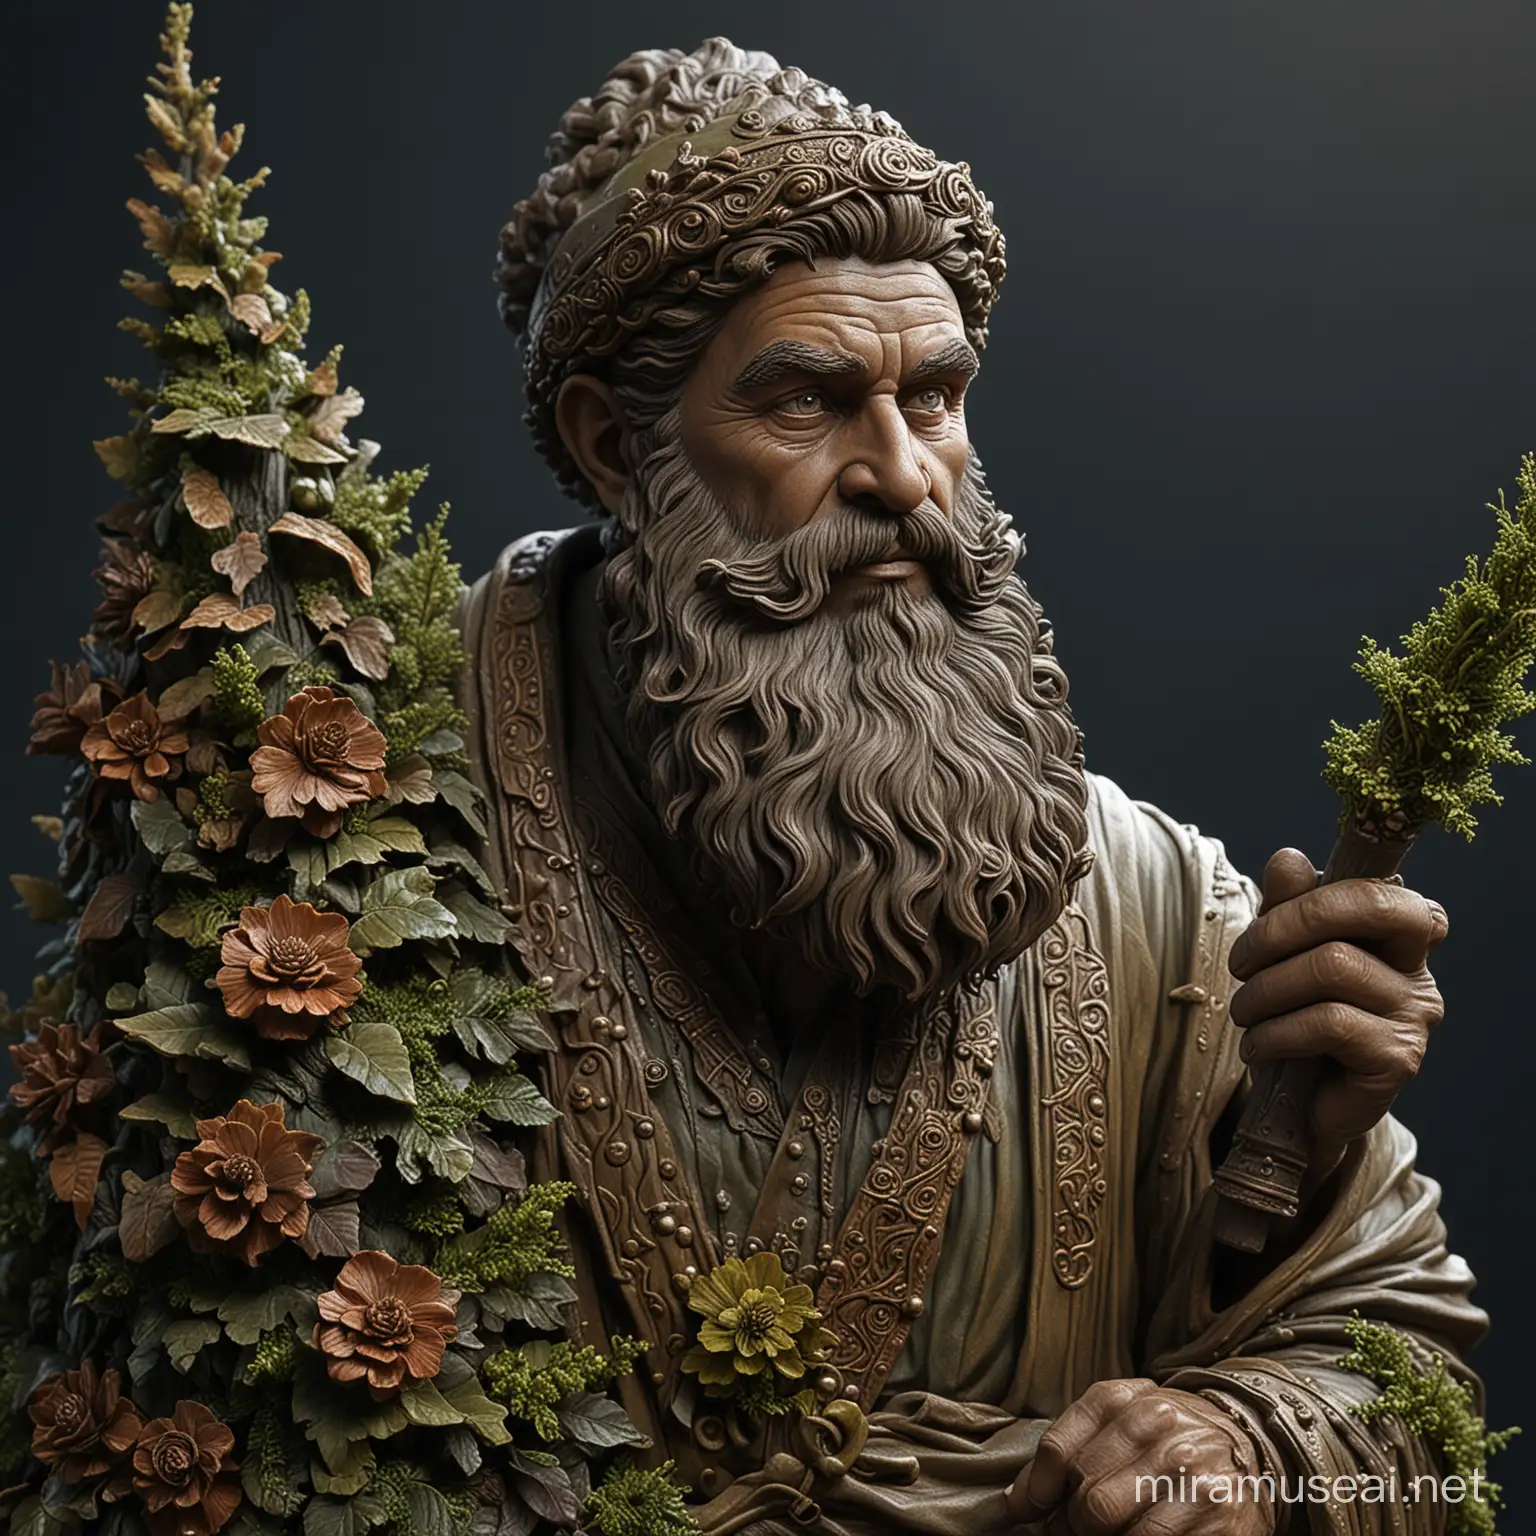 Enchanted Forest Guardian Sculpture Bearded Man in Moss and Cones with Magic Staff